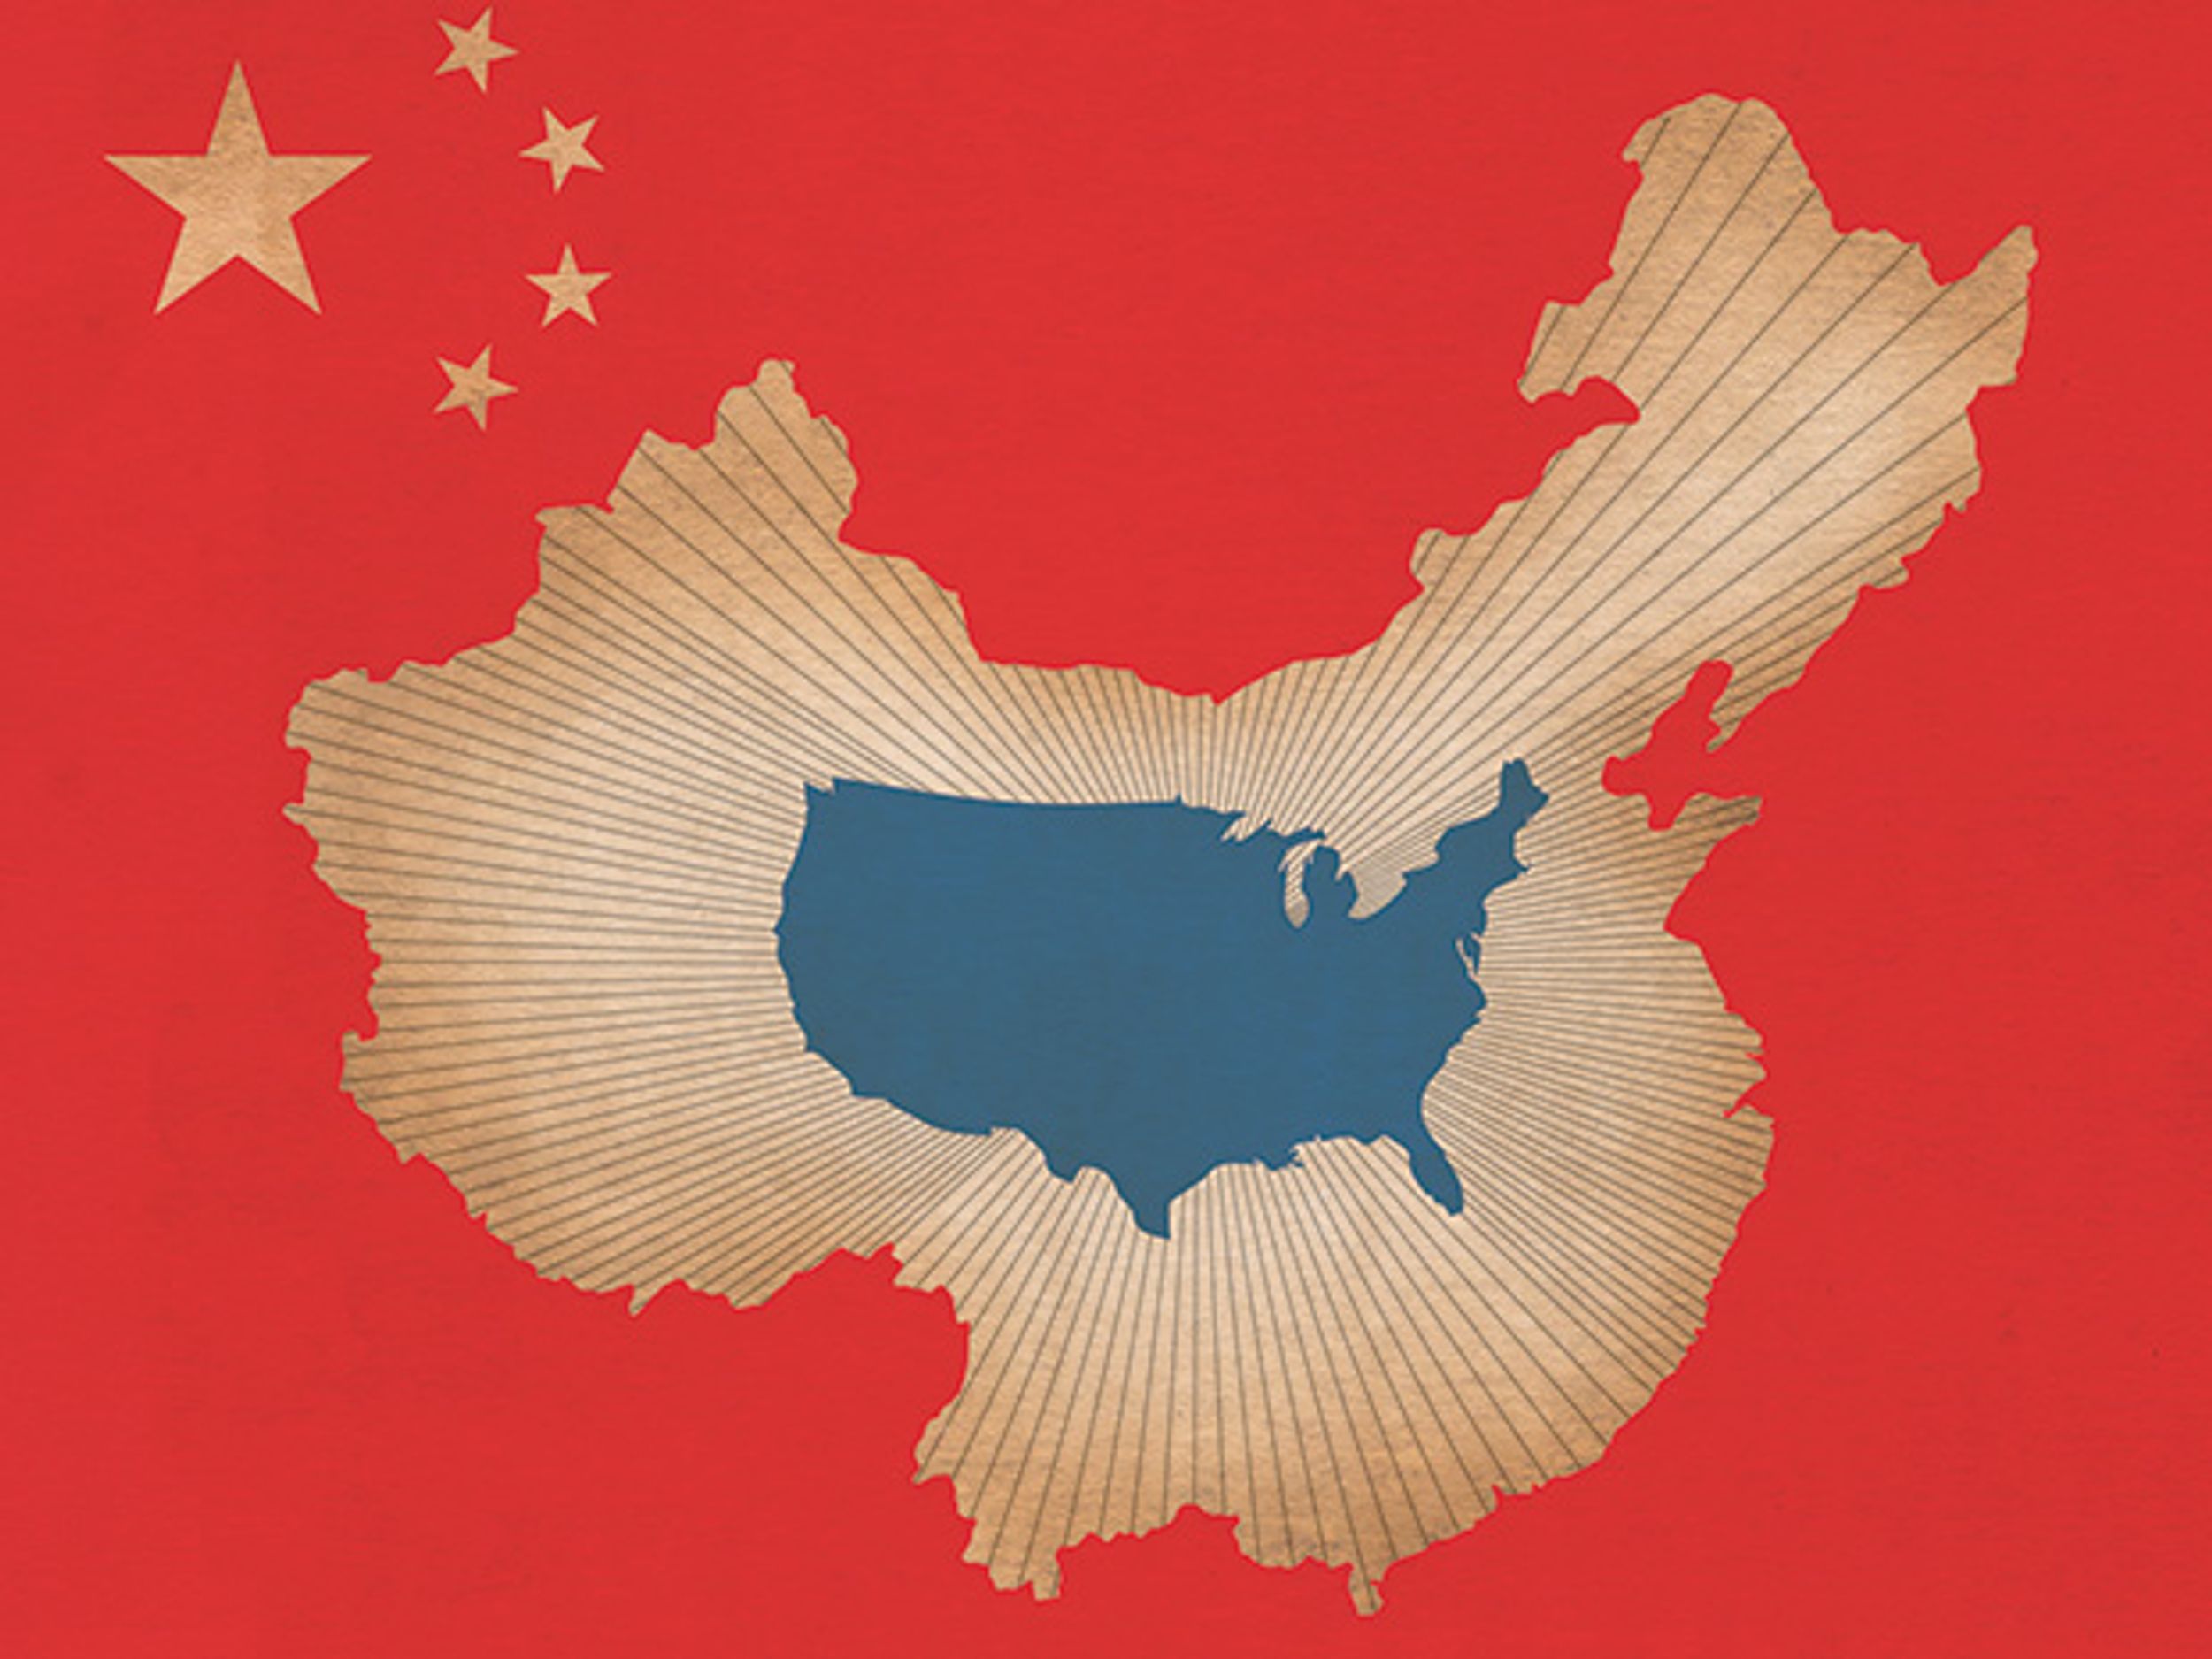 illustration showing maps of China and U.S.